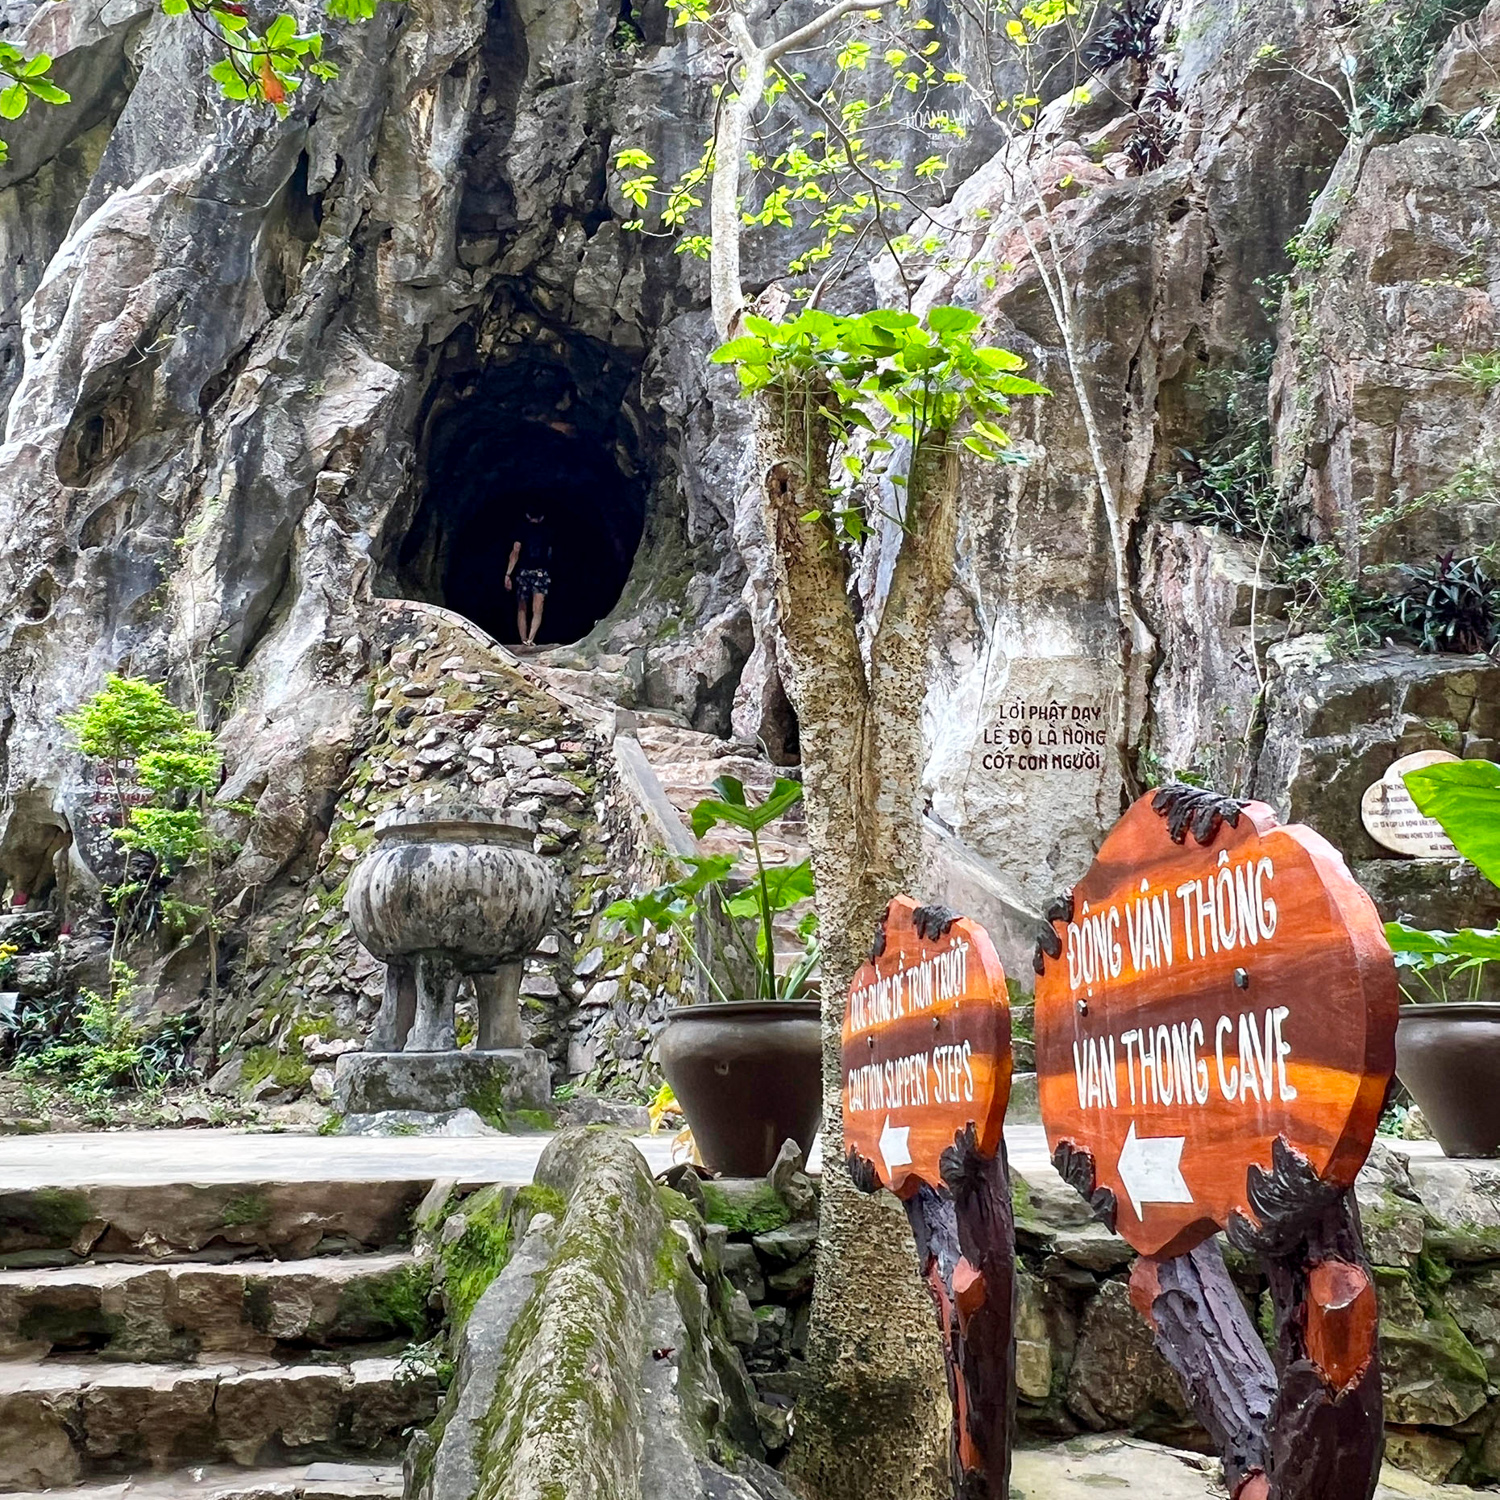 Van Thong Cave entrance at Marble Mountains in Central Vietnam